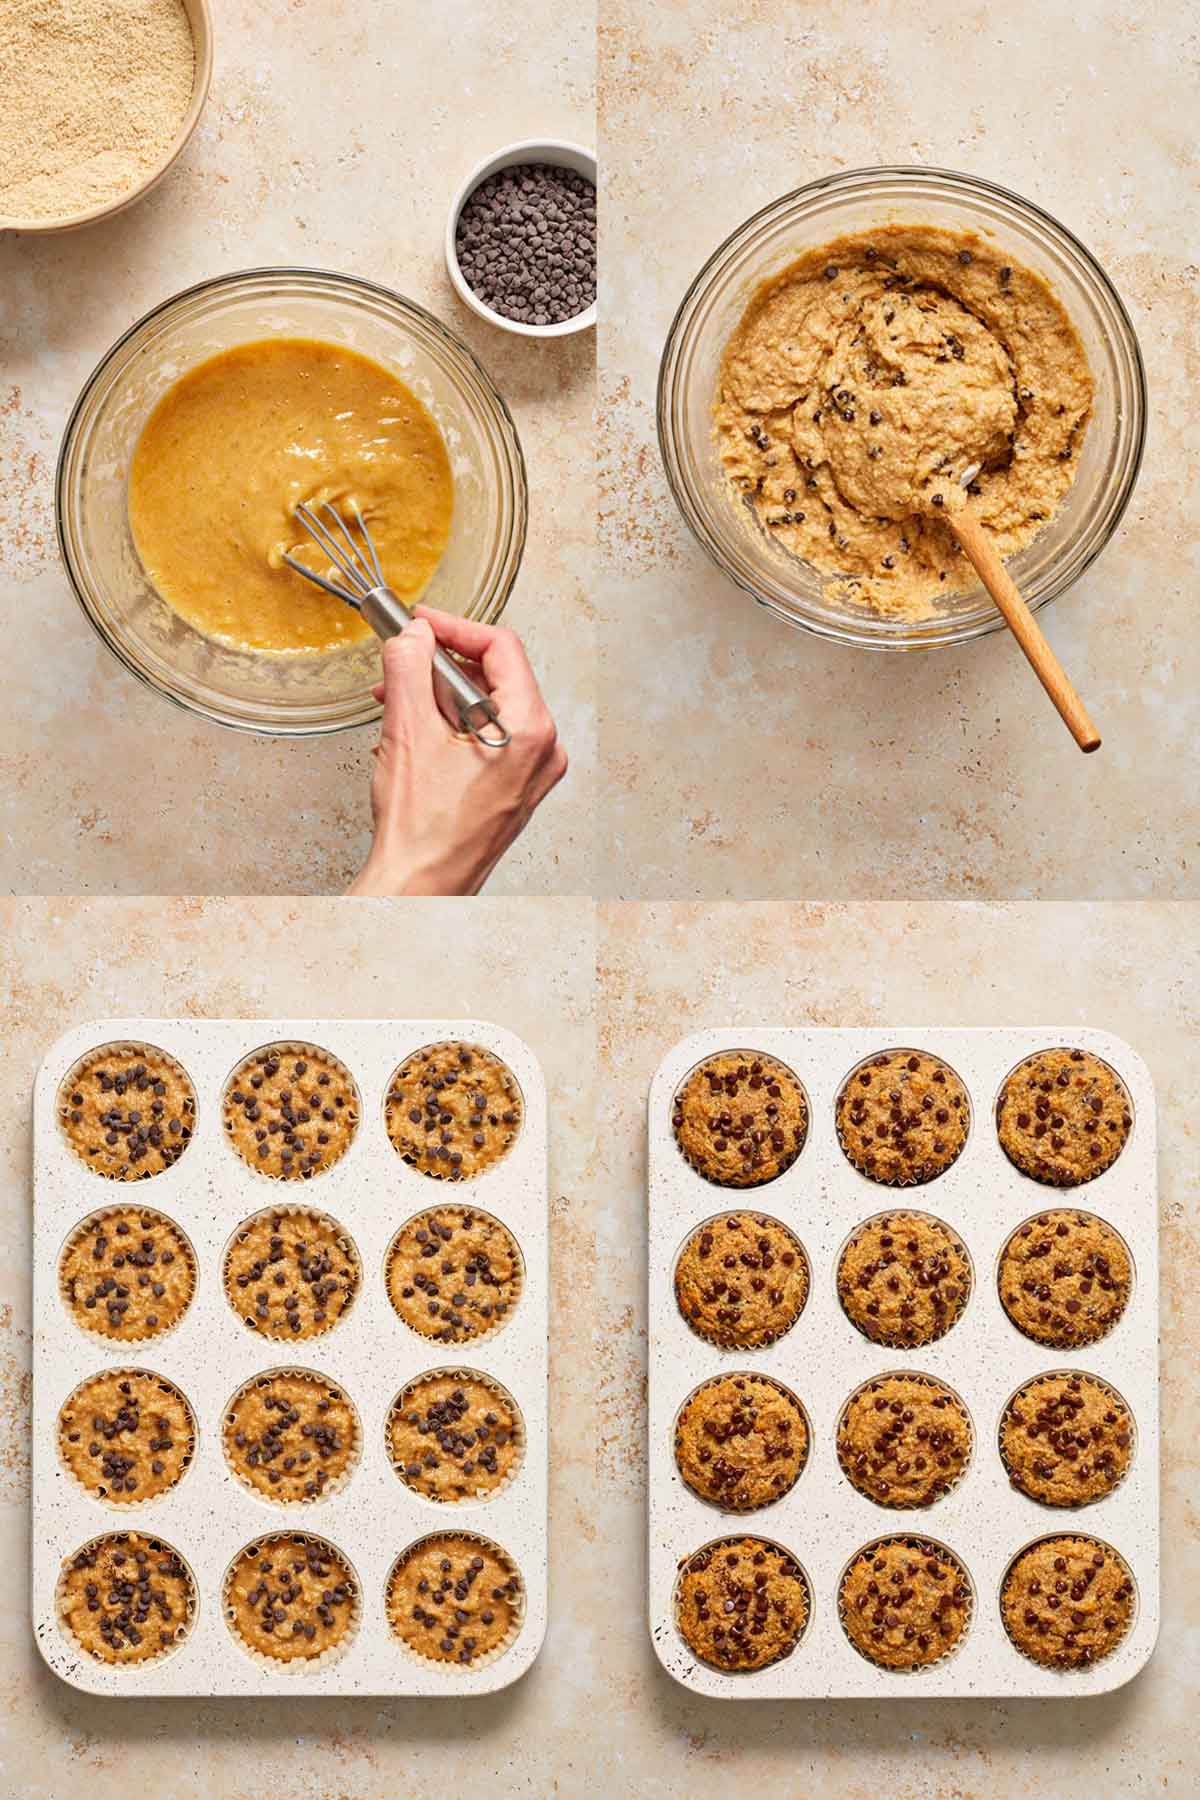 Collage of 4 images showing how the banana muffin batter is made and baked in a muffin pan.